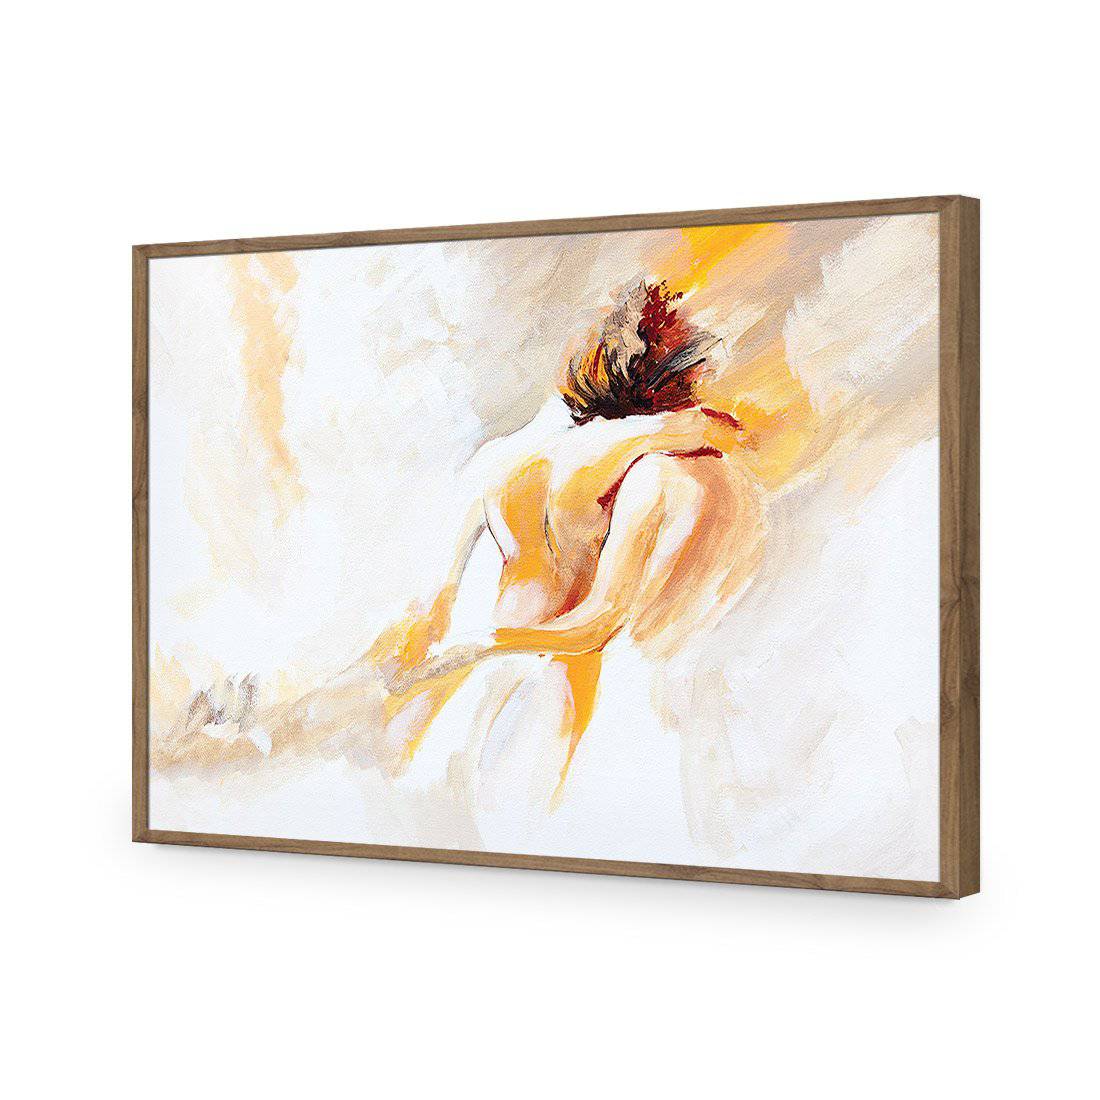 Naked Emotion-Acrylic-Wall Art Design-Without Border-Acrylic - Natural Frame-45x30cm-Wall Art Designs